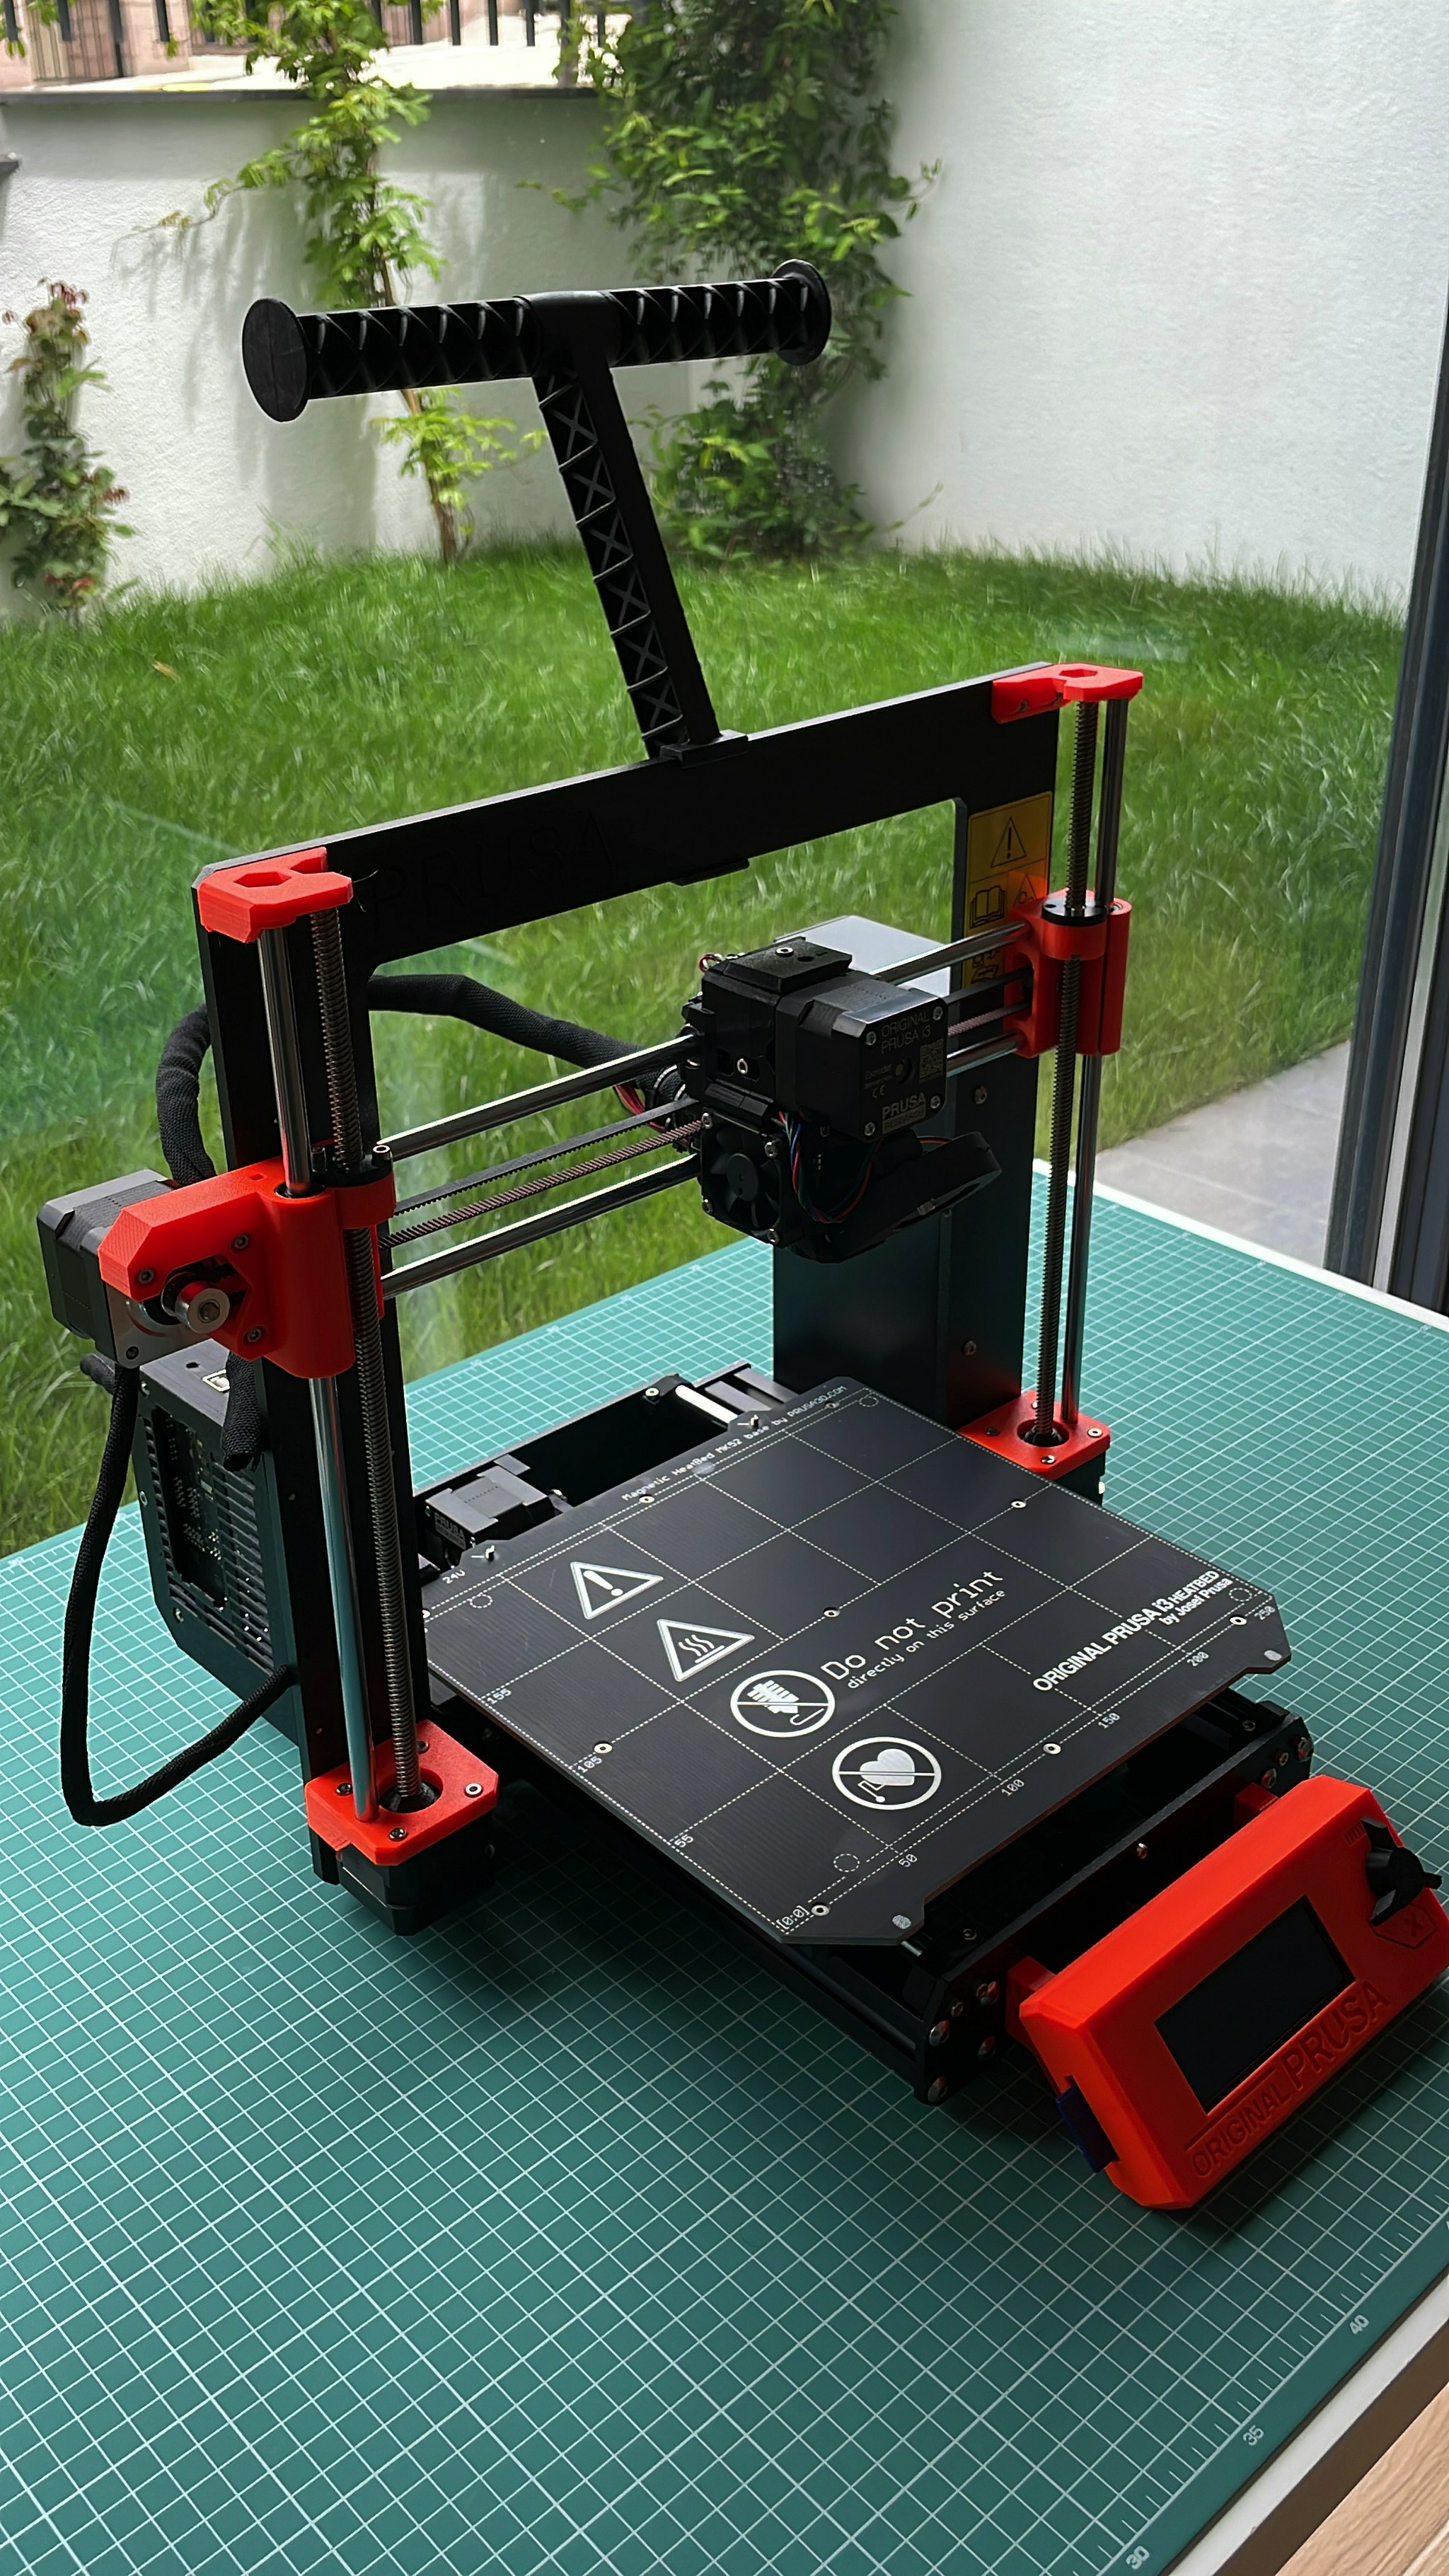 Assembled version of the Prusa 3D Printer